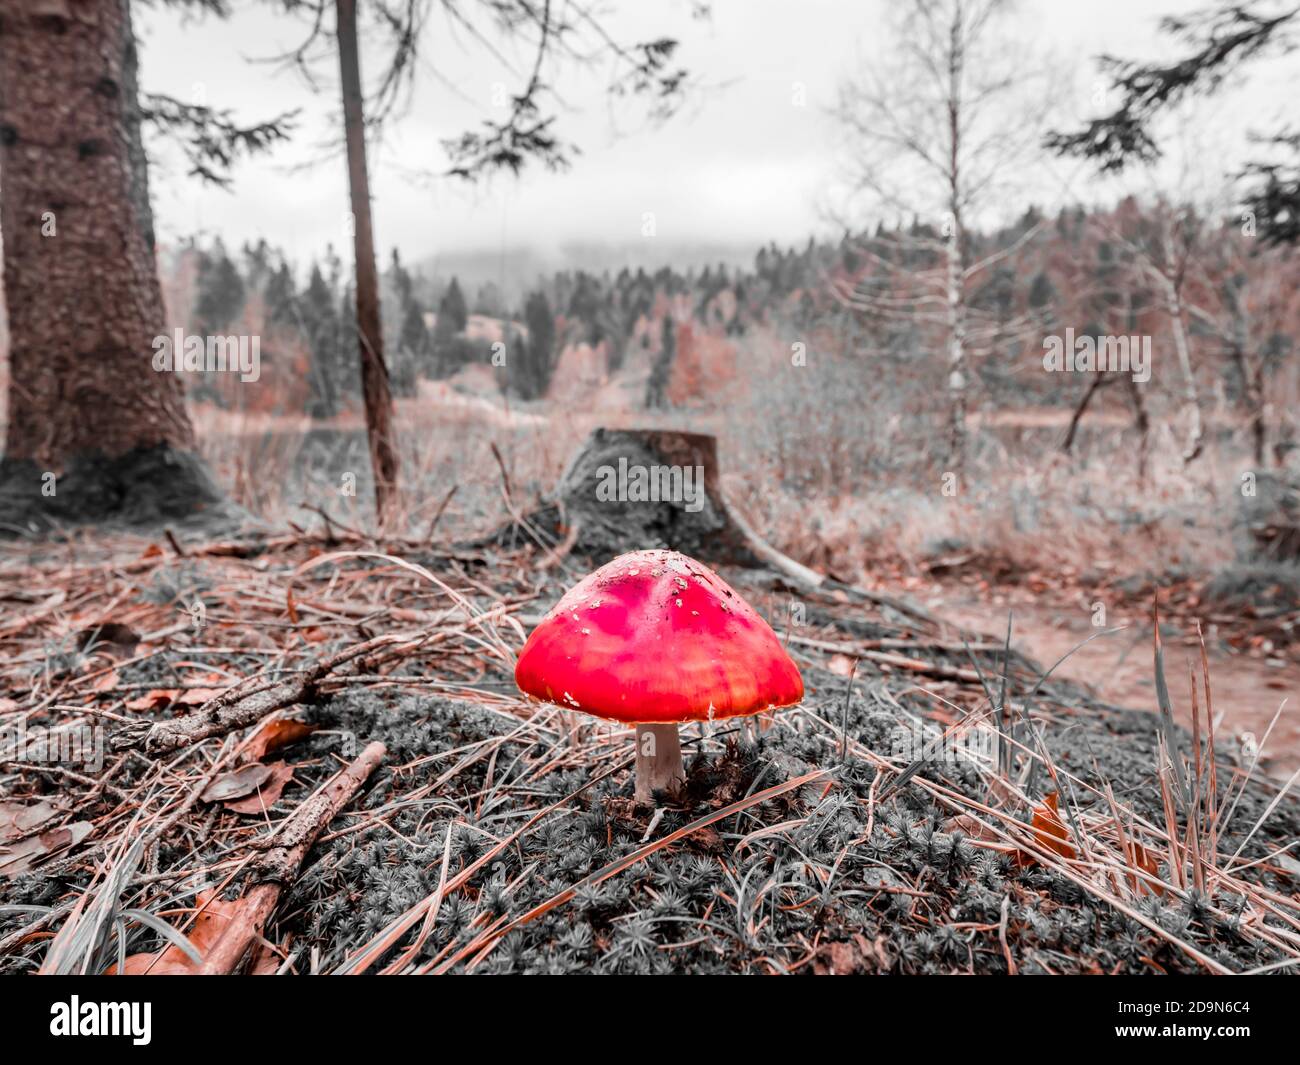 Poisonous mushroom Fly agaric (Amanita muscaria) Mrzla vodica in Croatia Europe low closeup close up  landscape scenic scenery altered color Red Stock Photo